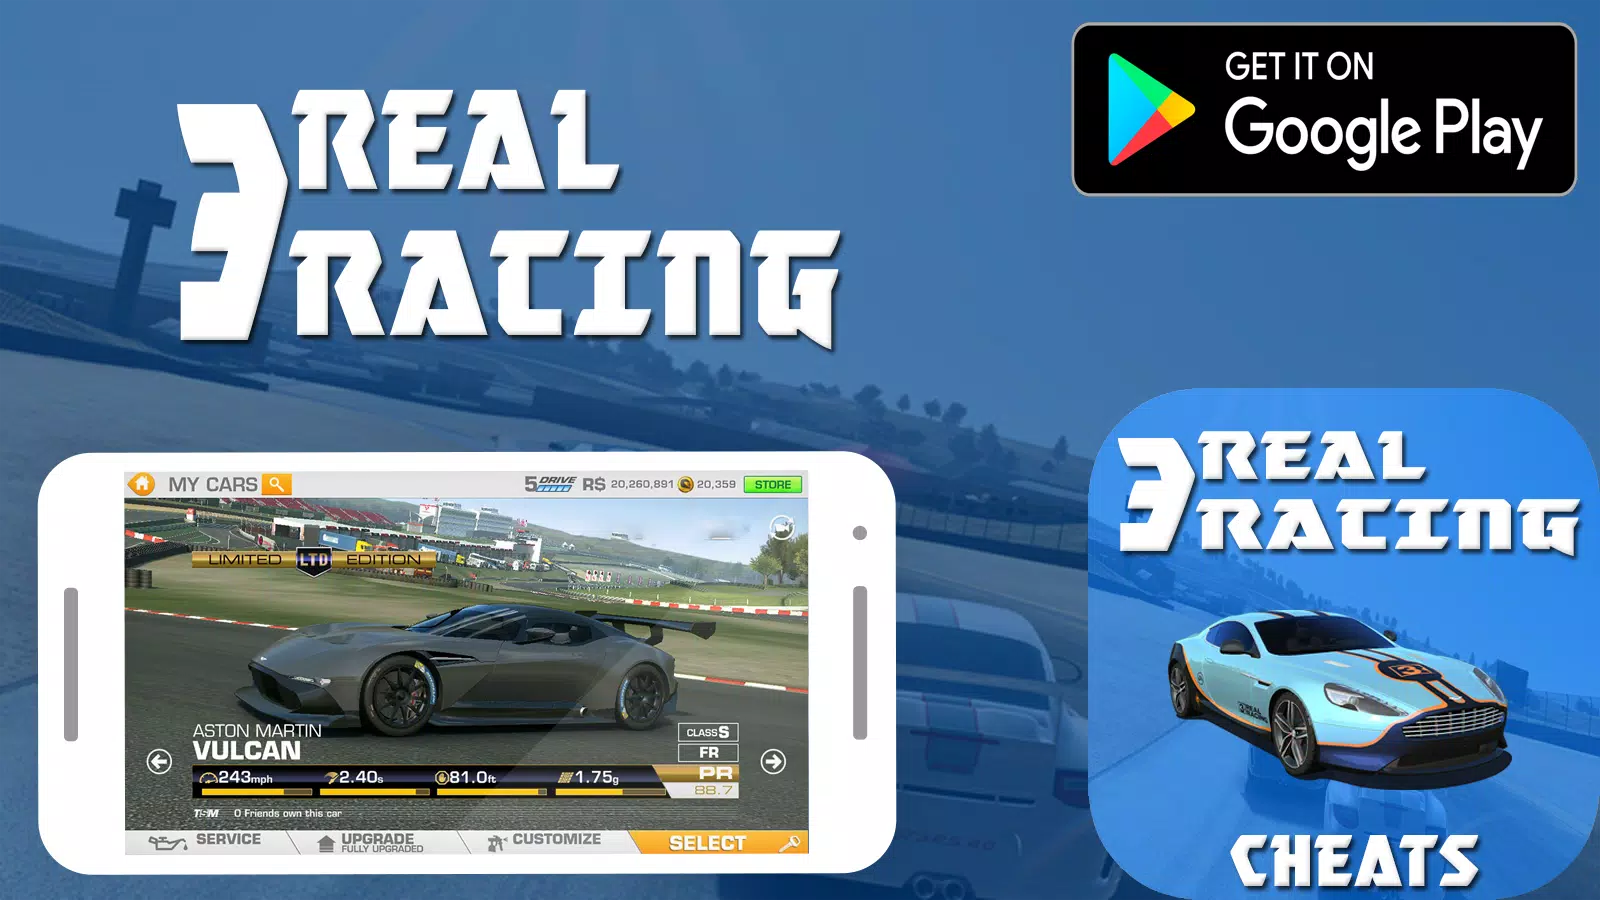 How to play Real Racing 3 with friends?